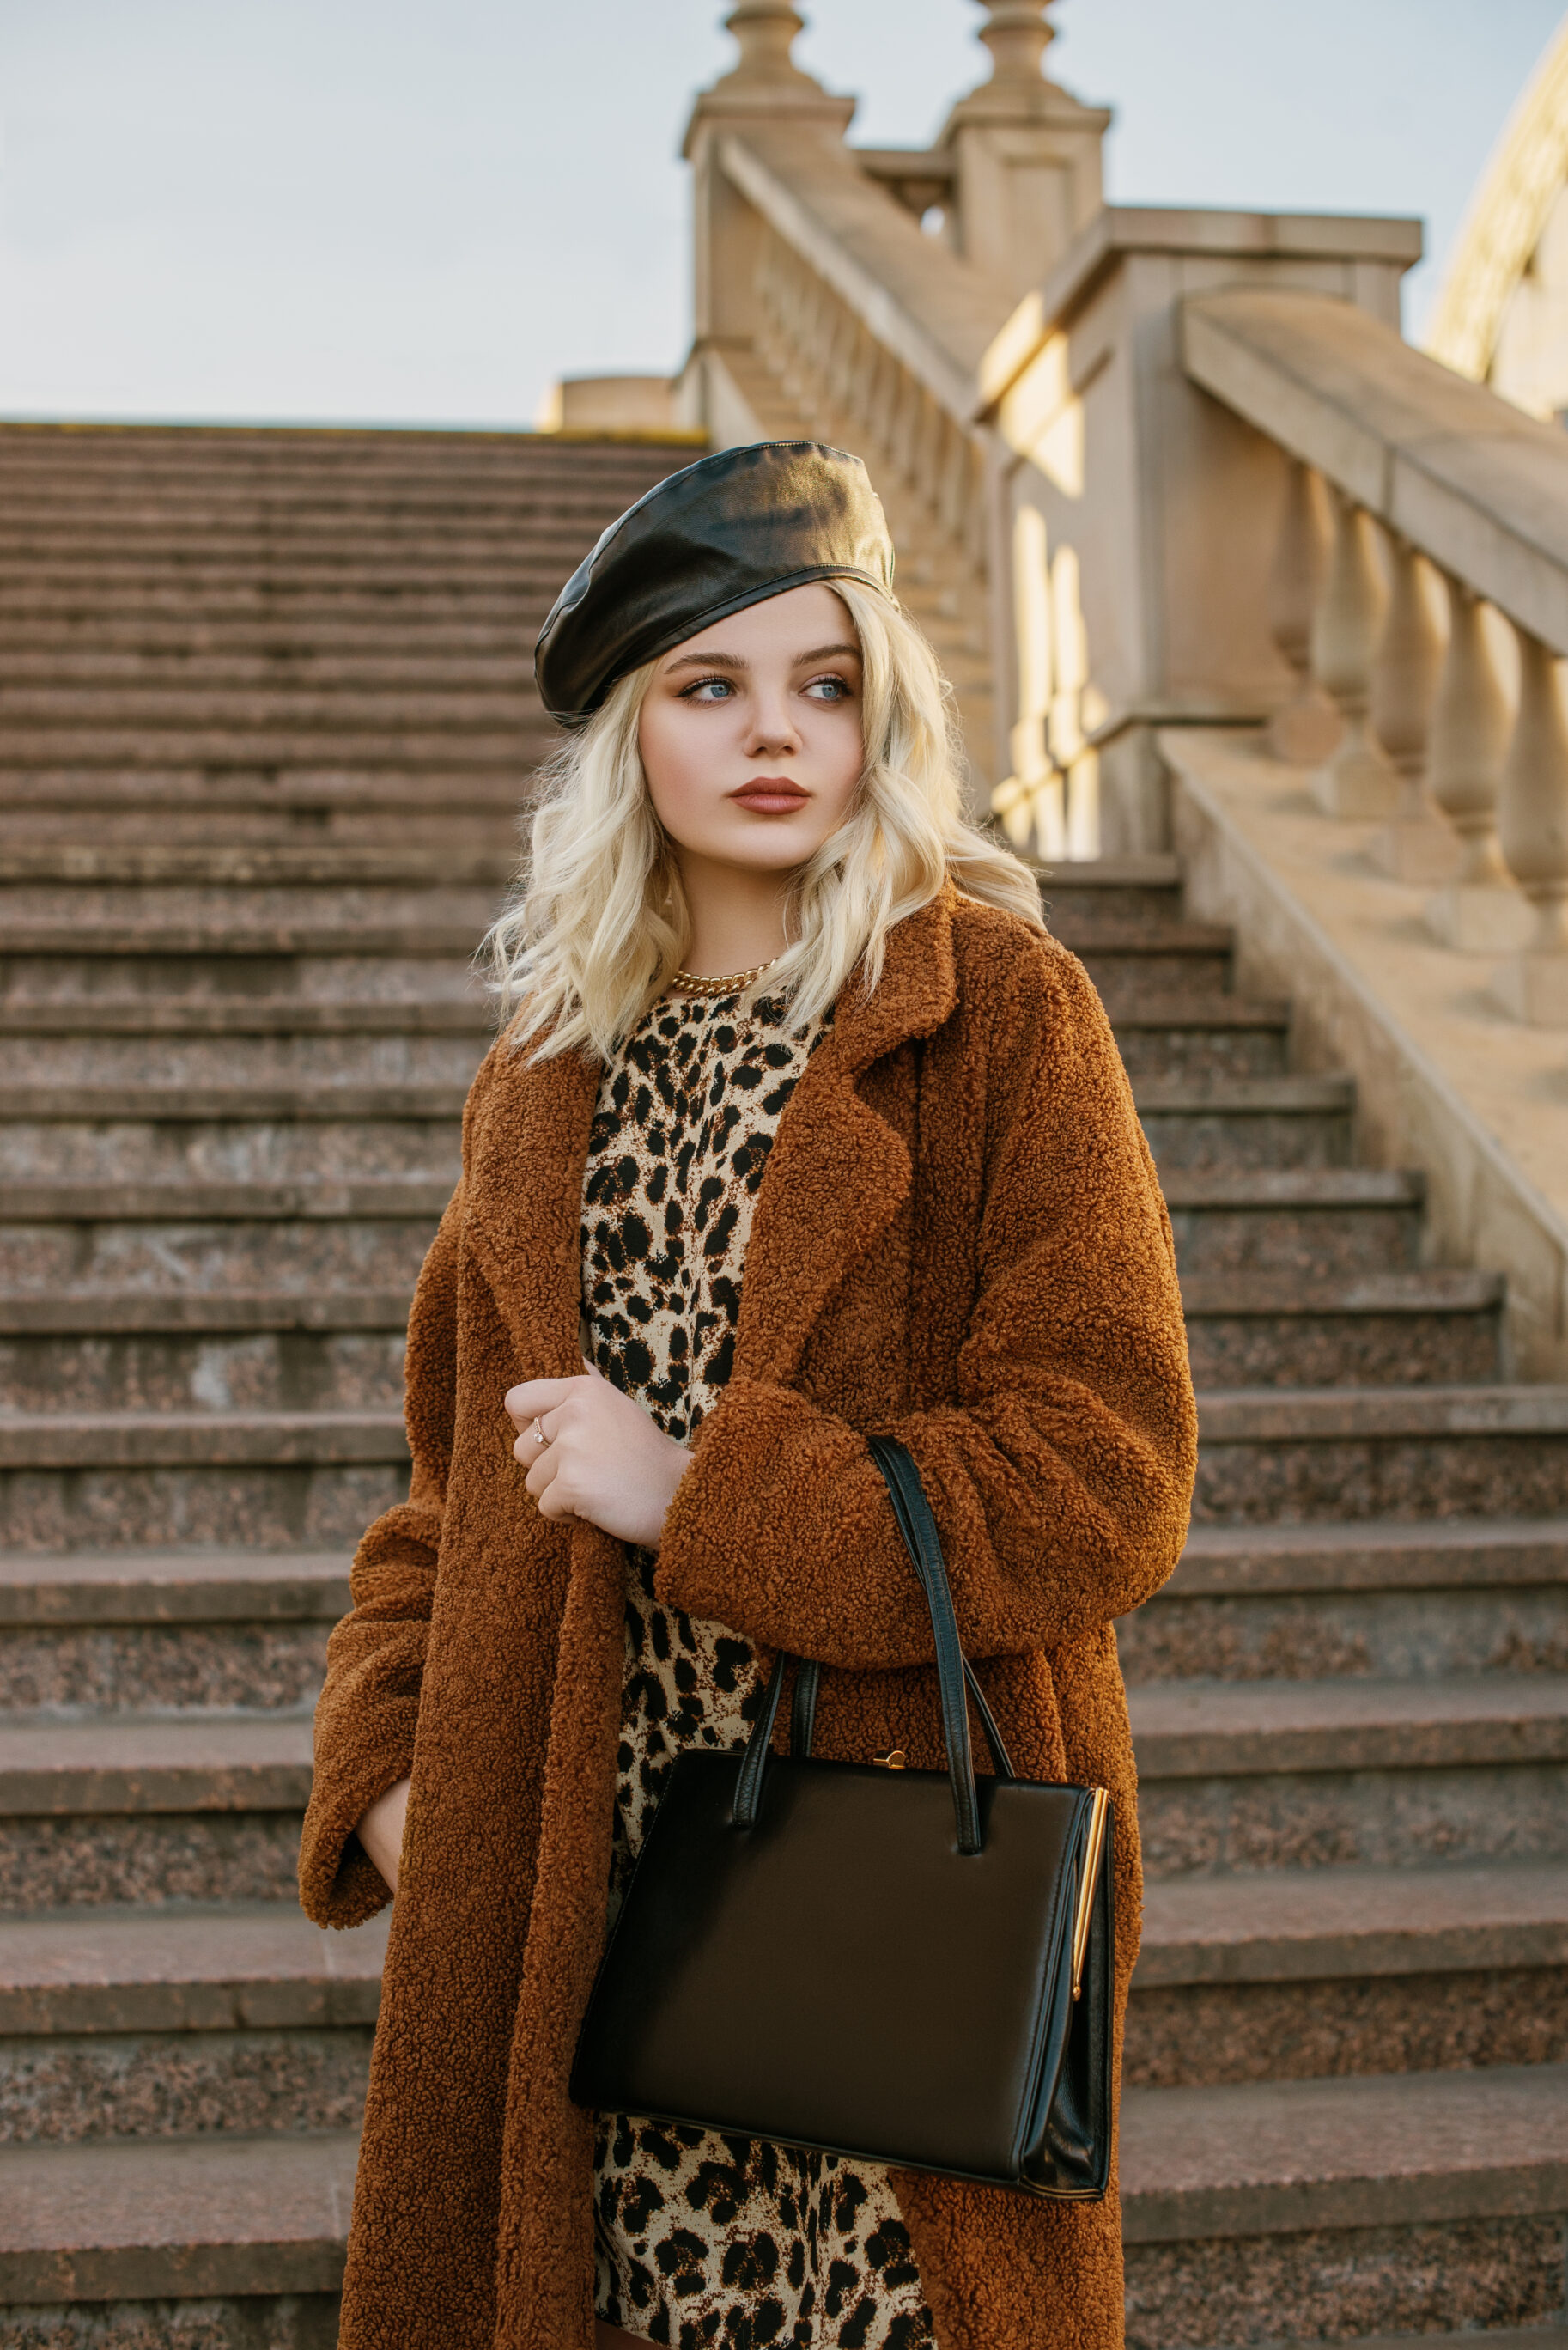 Patterned Dresses and Faux Fur Coats